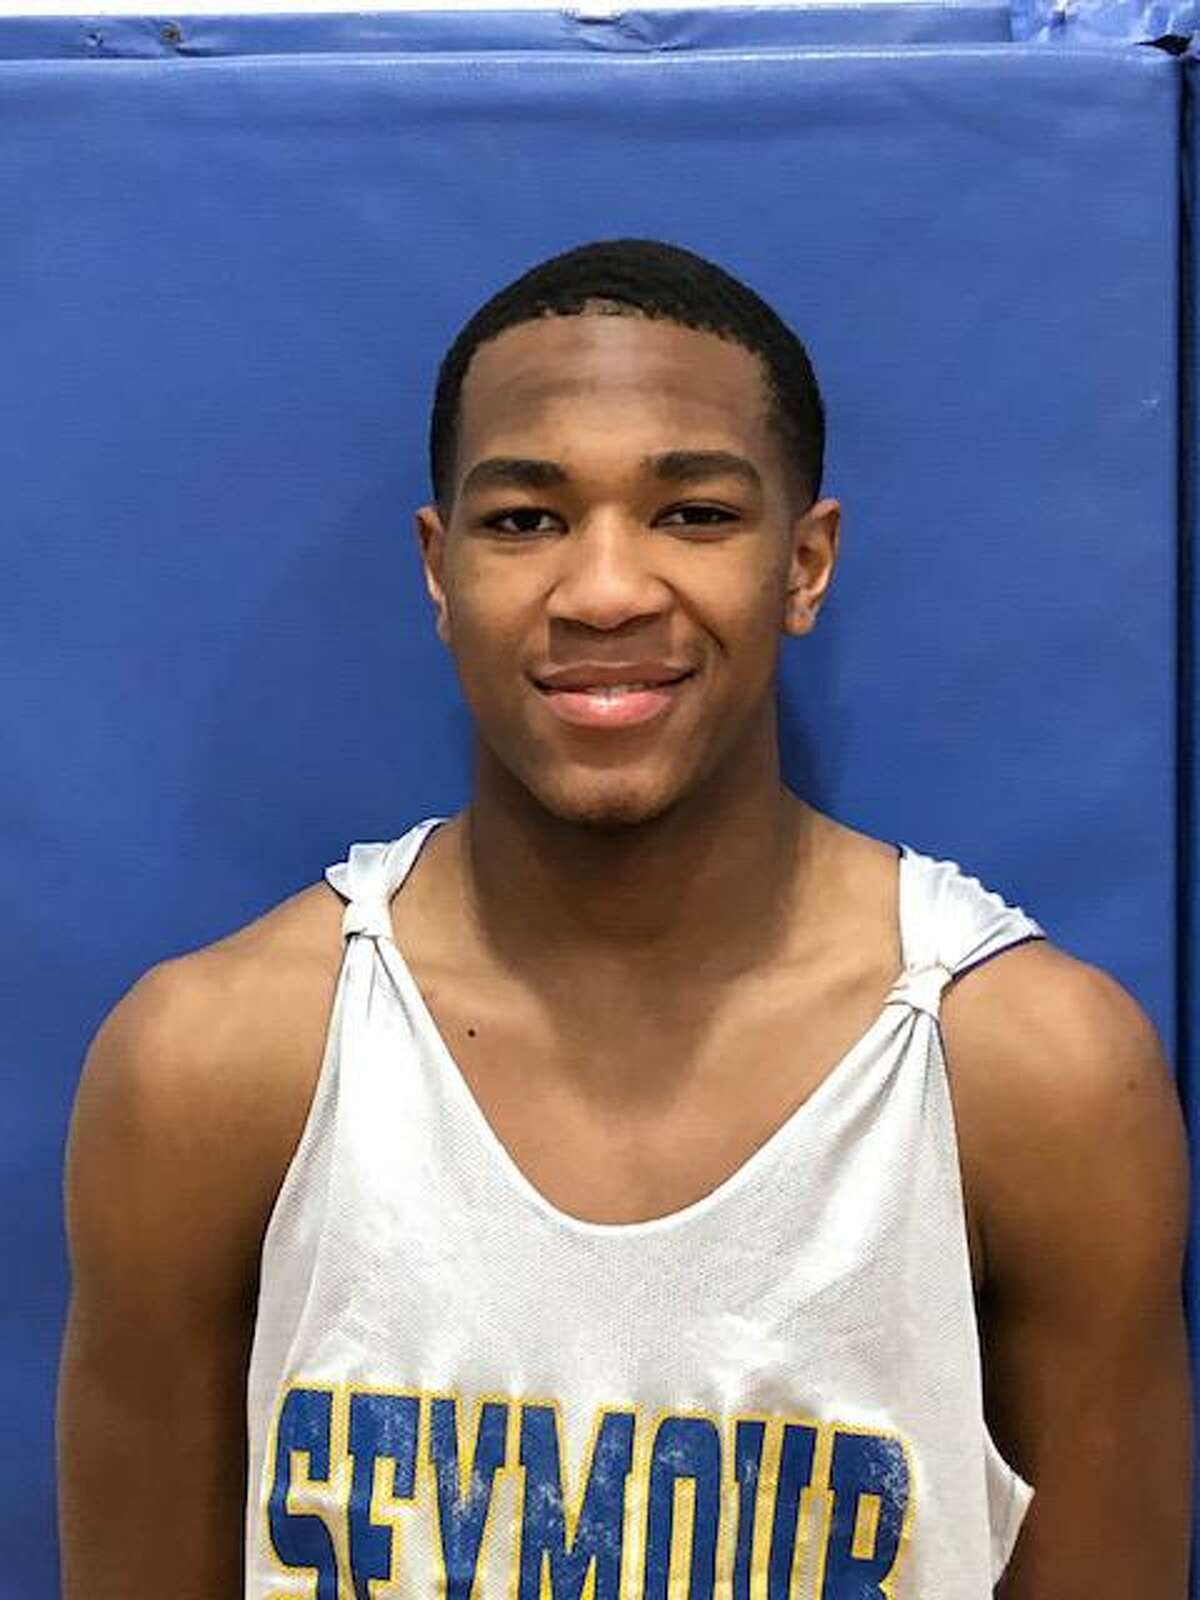 Dion Perkins broke the school record at Seymour by scoring 48 points in the Wildcats' loss to Torrington on Dec. 31, 2019.